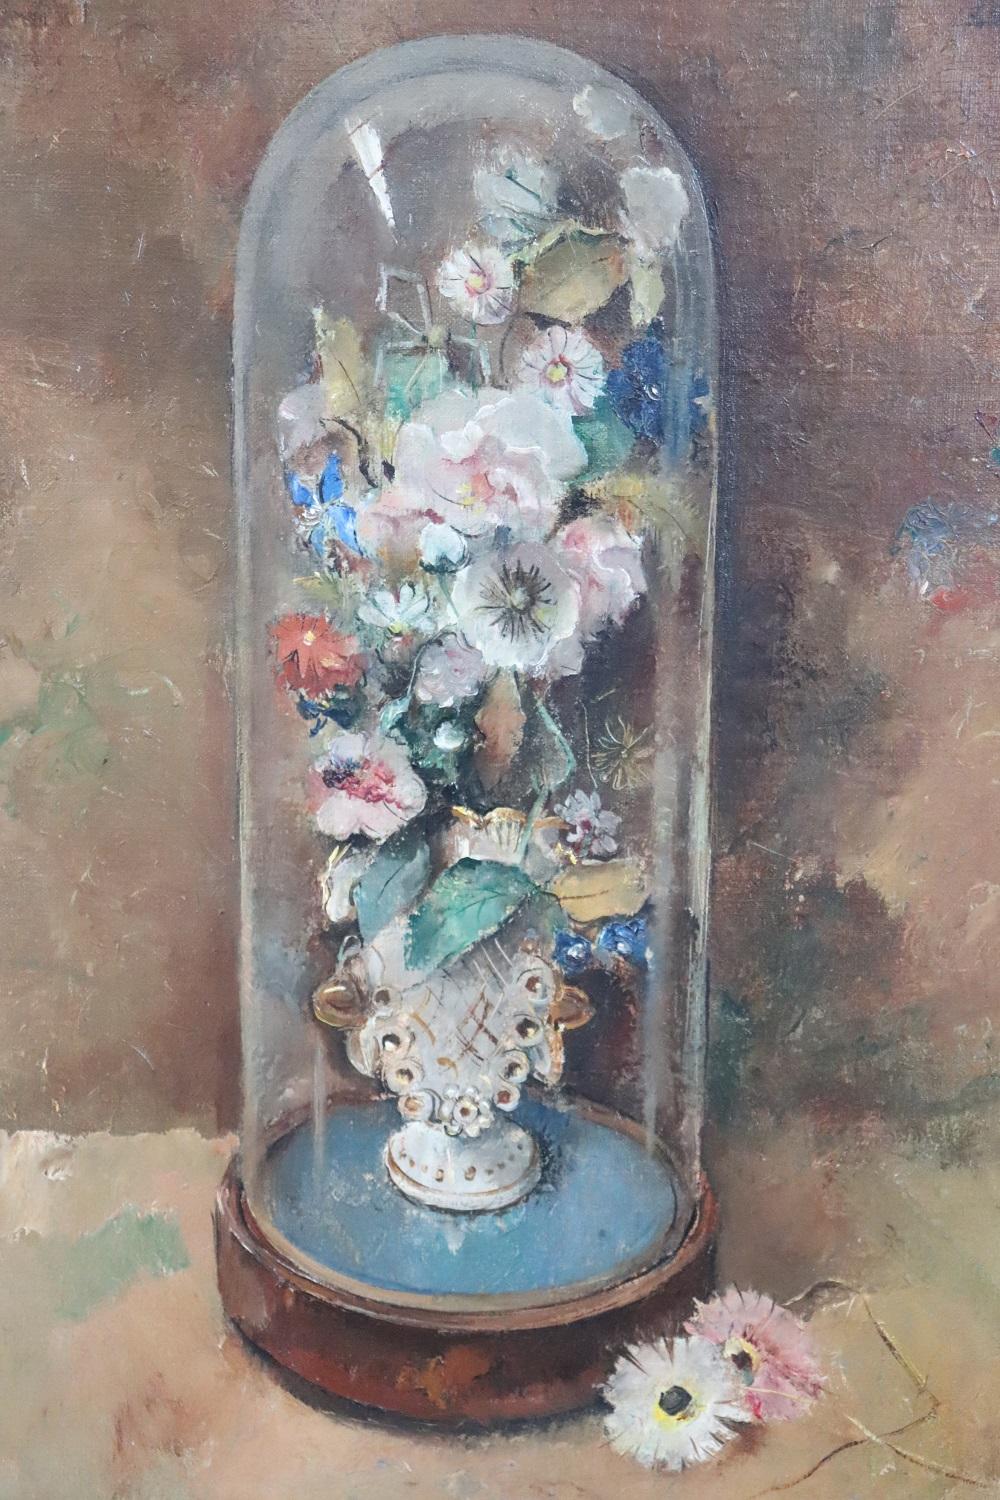 Beautiful oil painting on masonite board, signed and dated 1938. Signed painting but unidentified artist. A splendid particular still life with flowers within a glass bell. Excellent pictorial quality. Sold with beautiful wood frame.